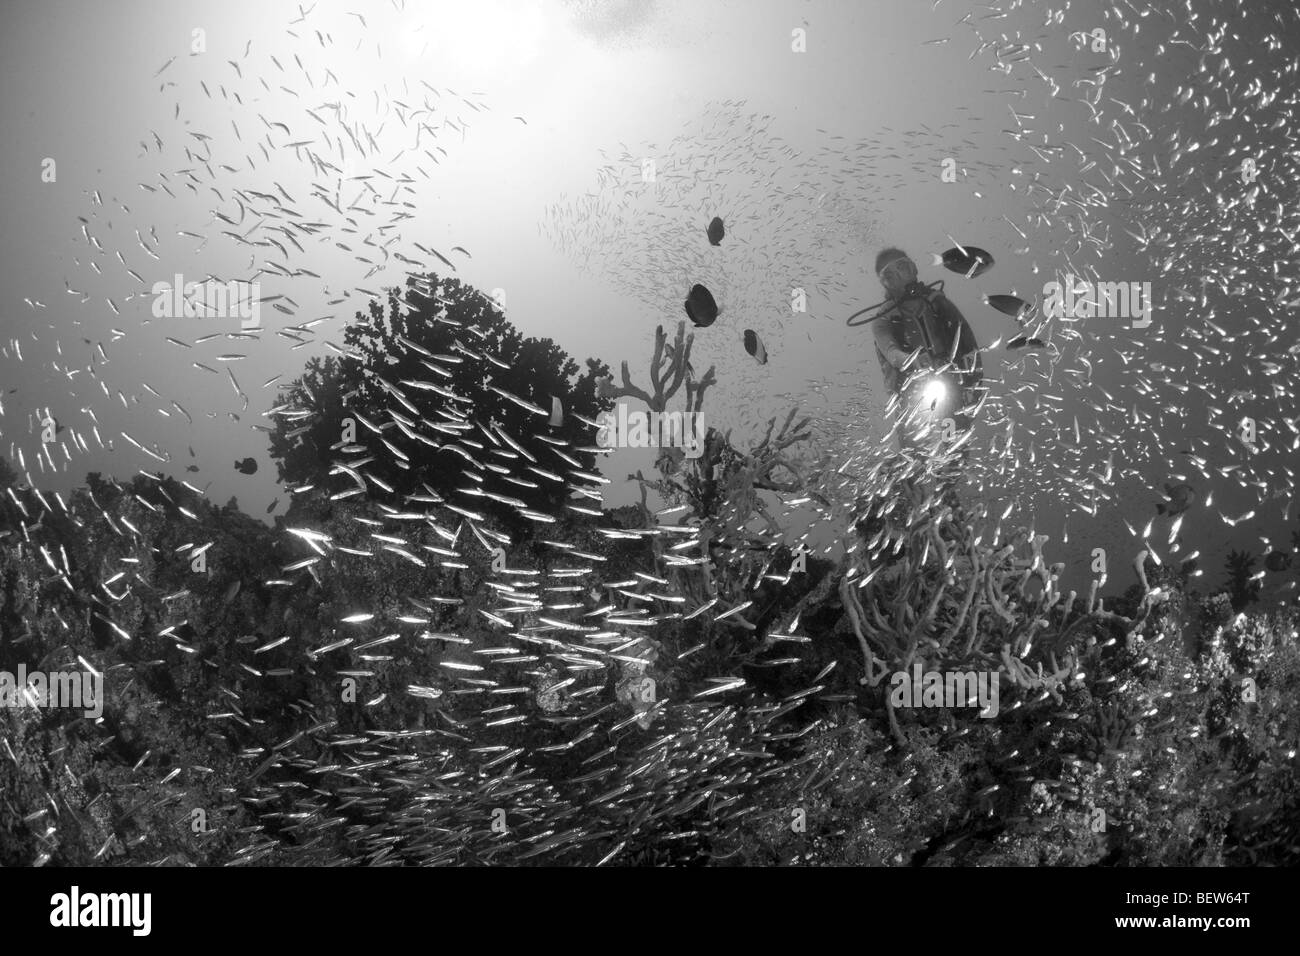 Coral Reef with Pigmy Sweepers, Parapriacanthus sp., Maya Thila, North Ari Atoll, Maldives Stock Photo